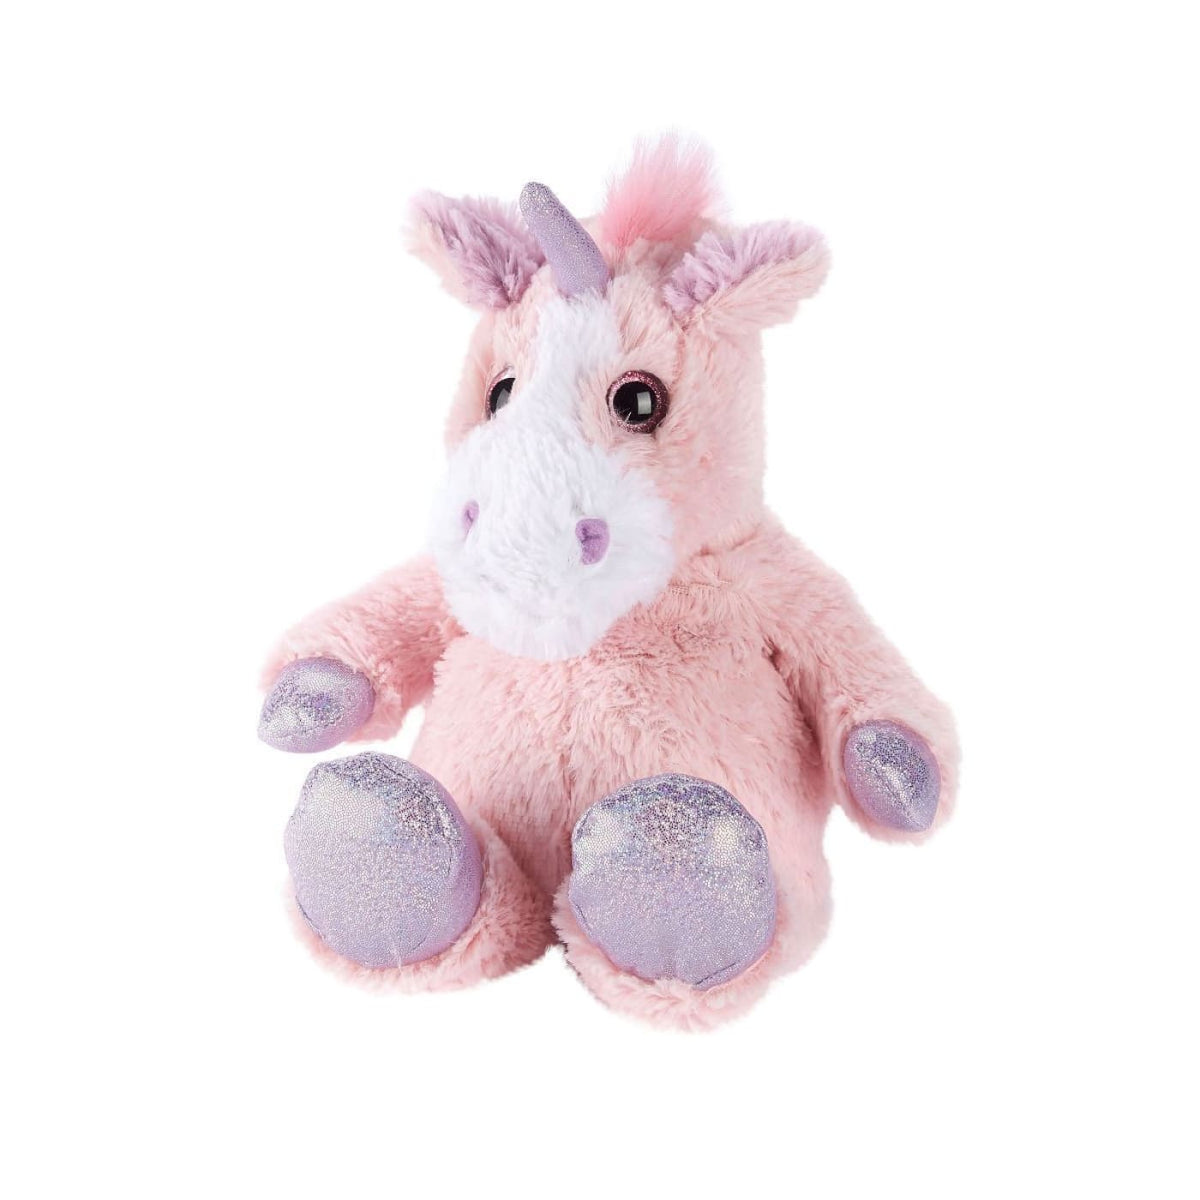 Warmies Cozy Plush - Sparkly Unicorn - Unicorn - HEALTH &amp; HOME SAFETY - THERMOMETERS/MEDICINAL